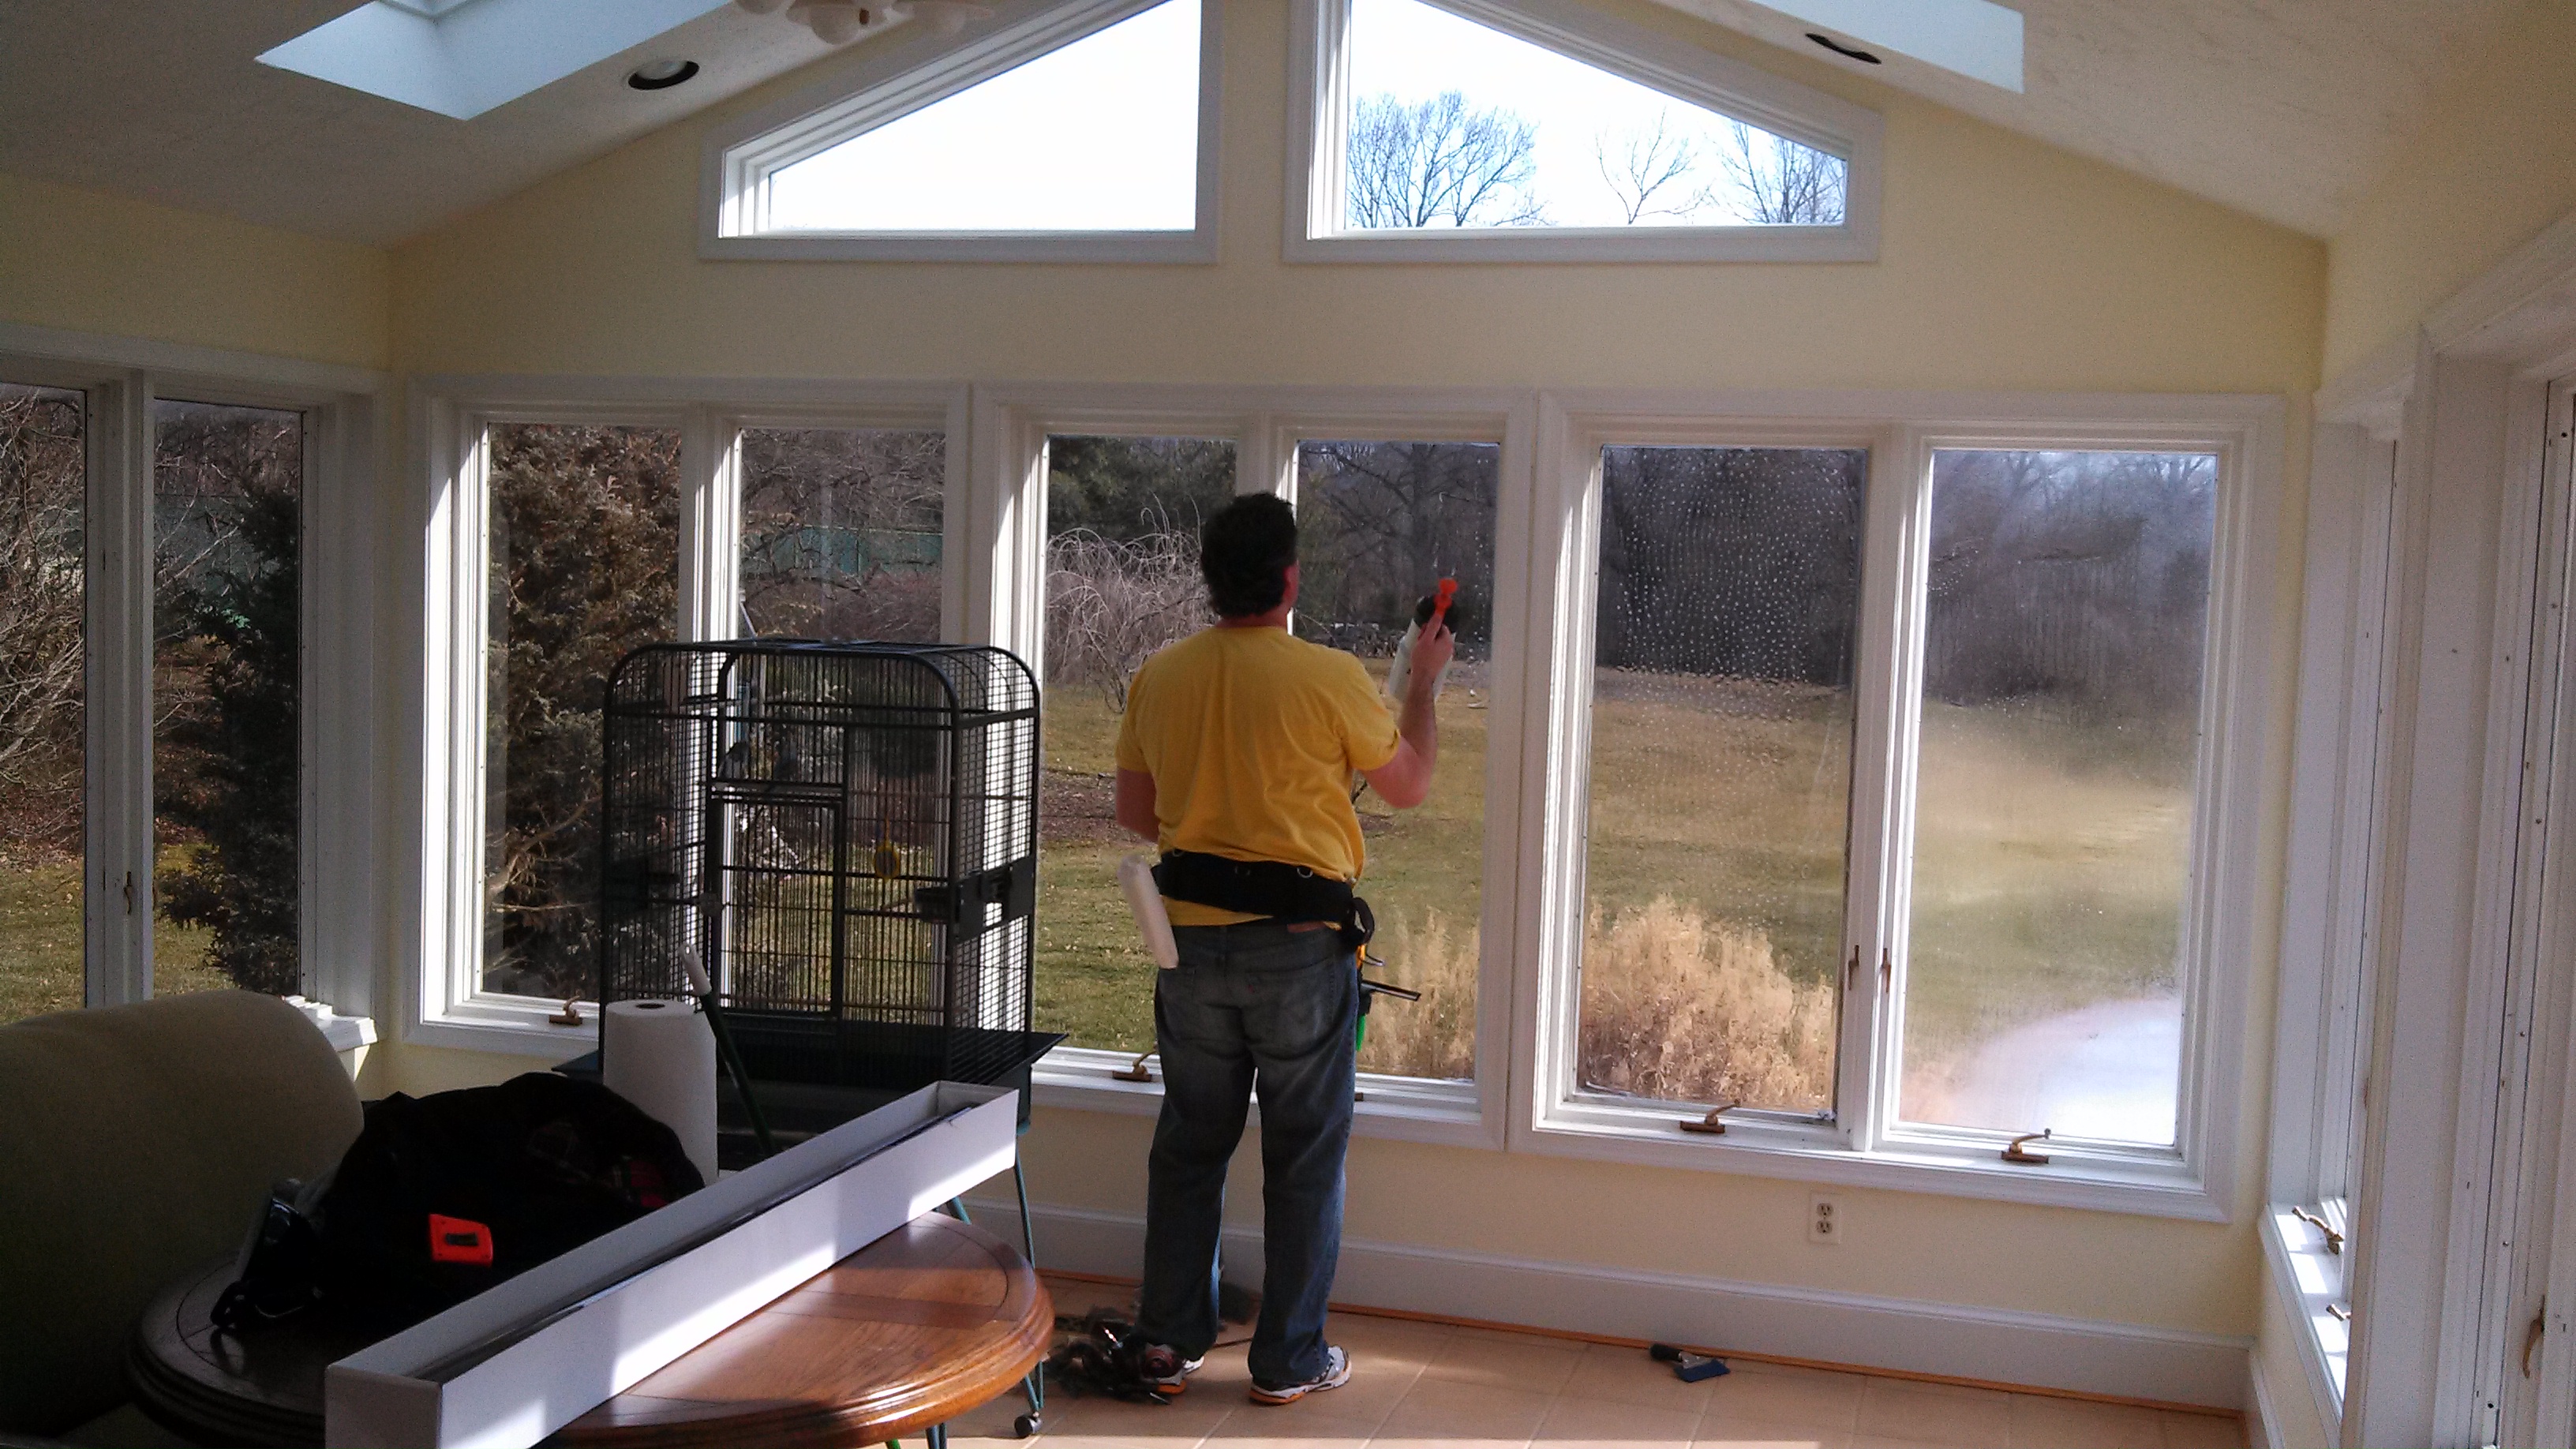 The Pro S And Con Of Window Tinting, How To Put Mirror Tint On House Windows